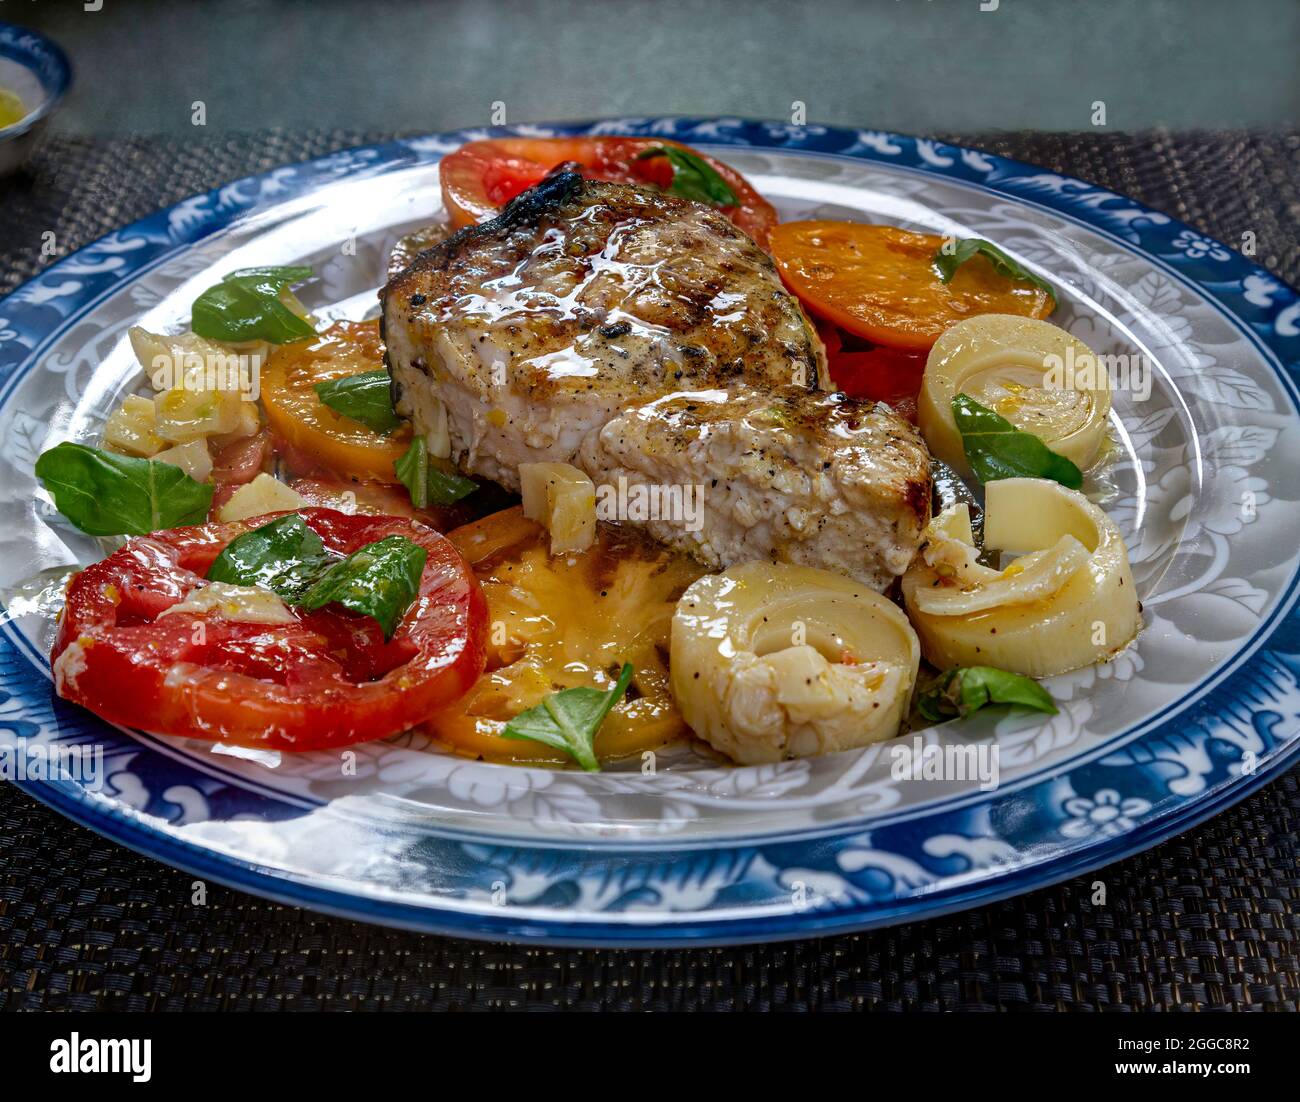 Grilled Swordfish with Heirloom Tomato's and Hearts of Palm Salad. Stock Photo